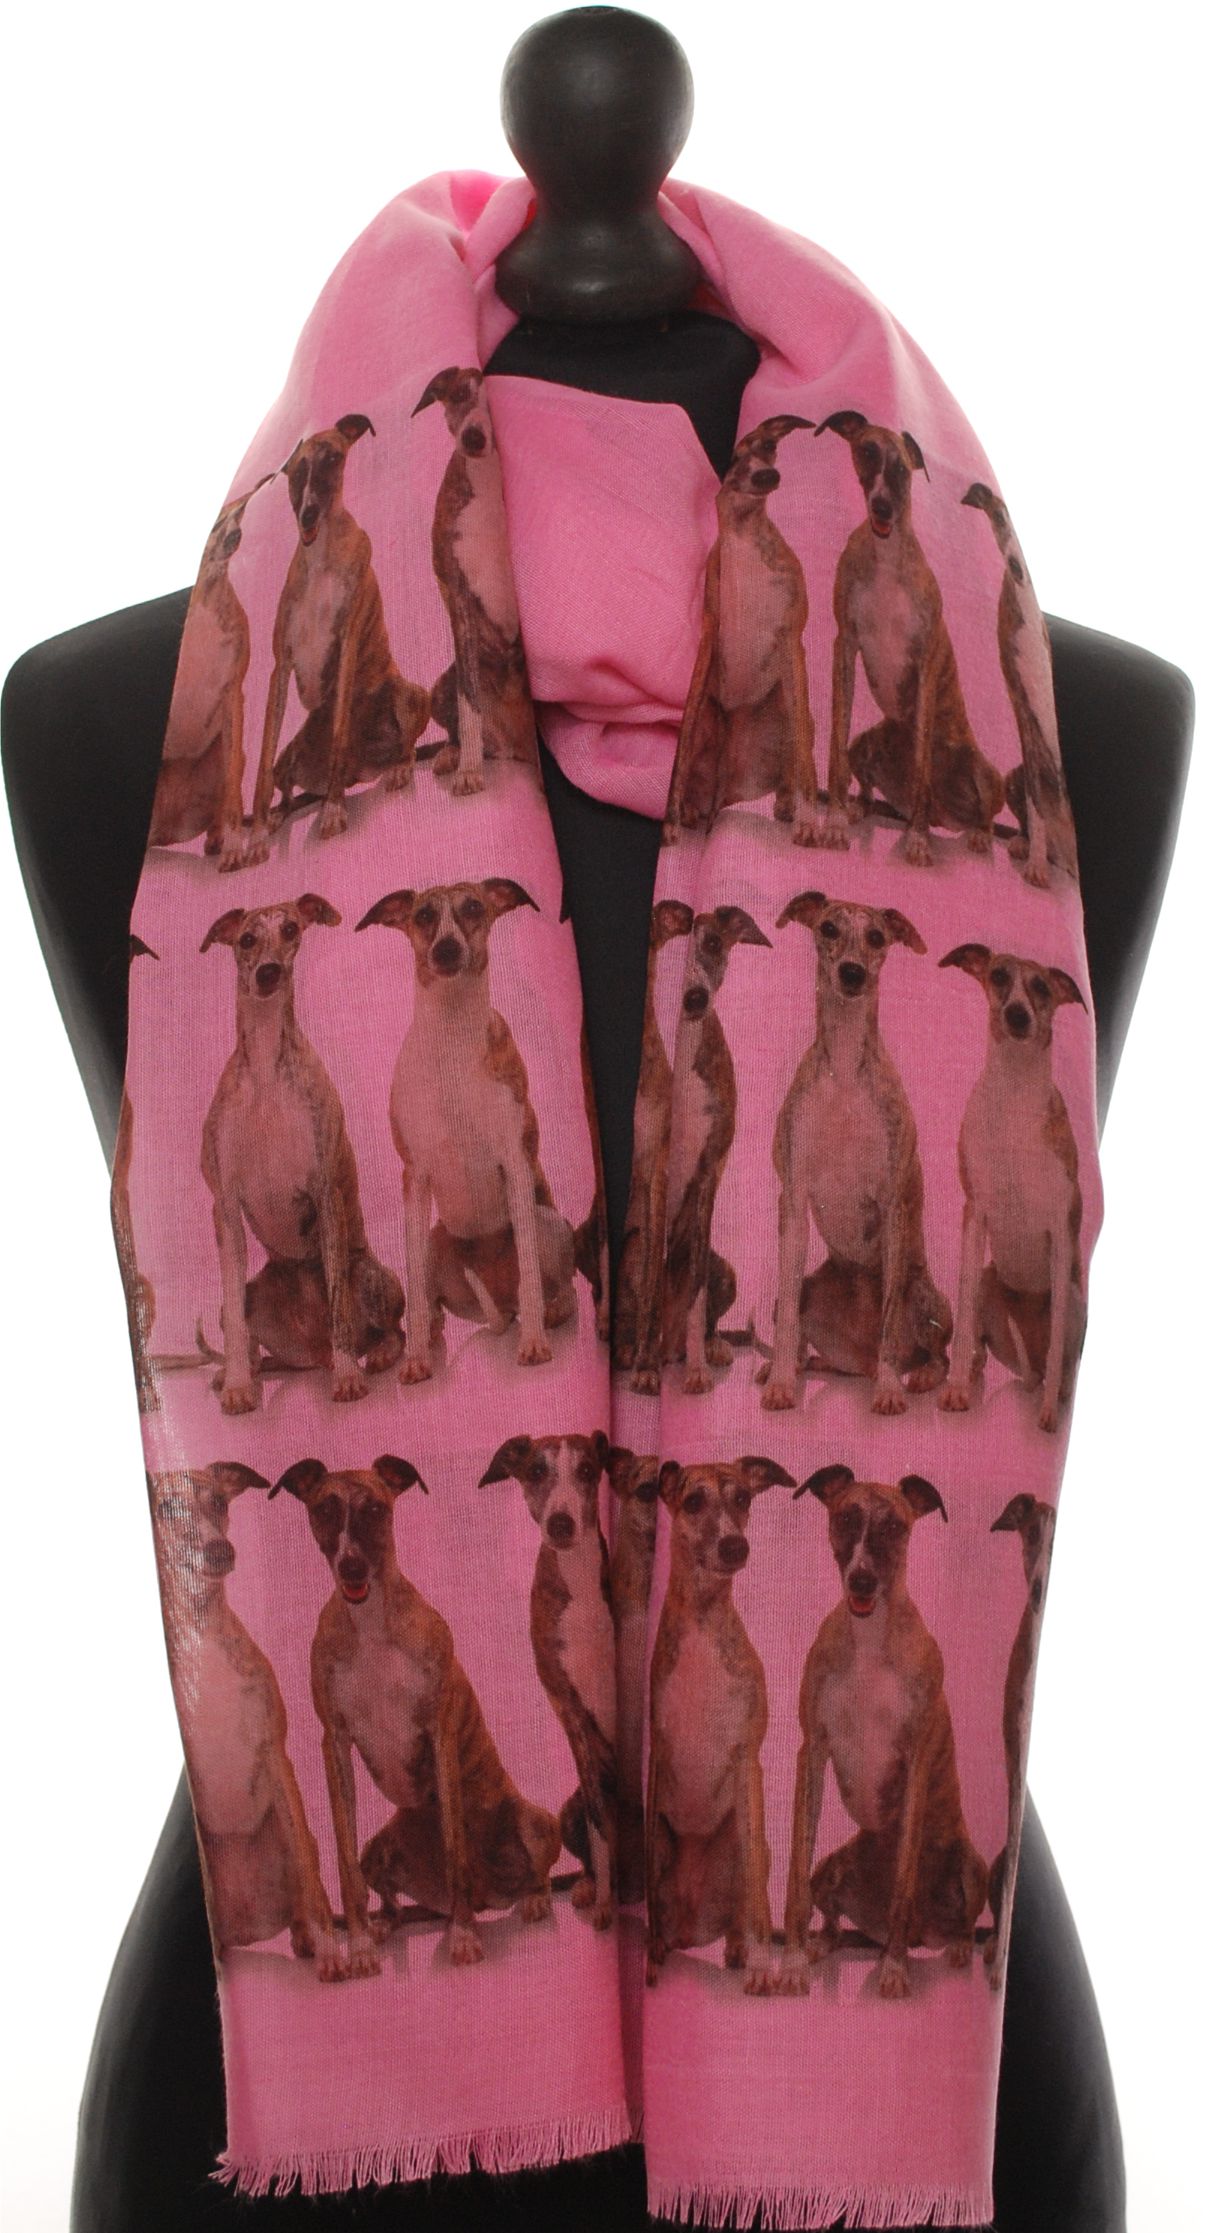 Whippet hand printed ladies fashion scarf